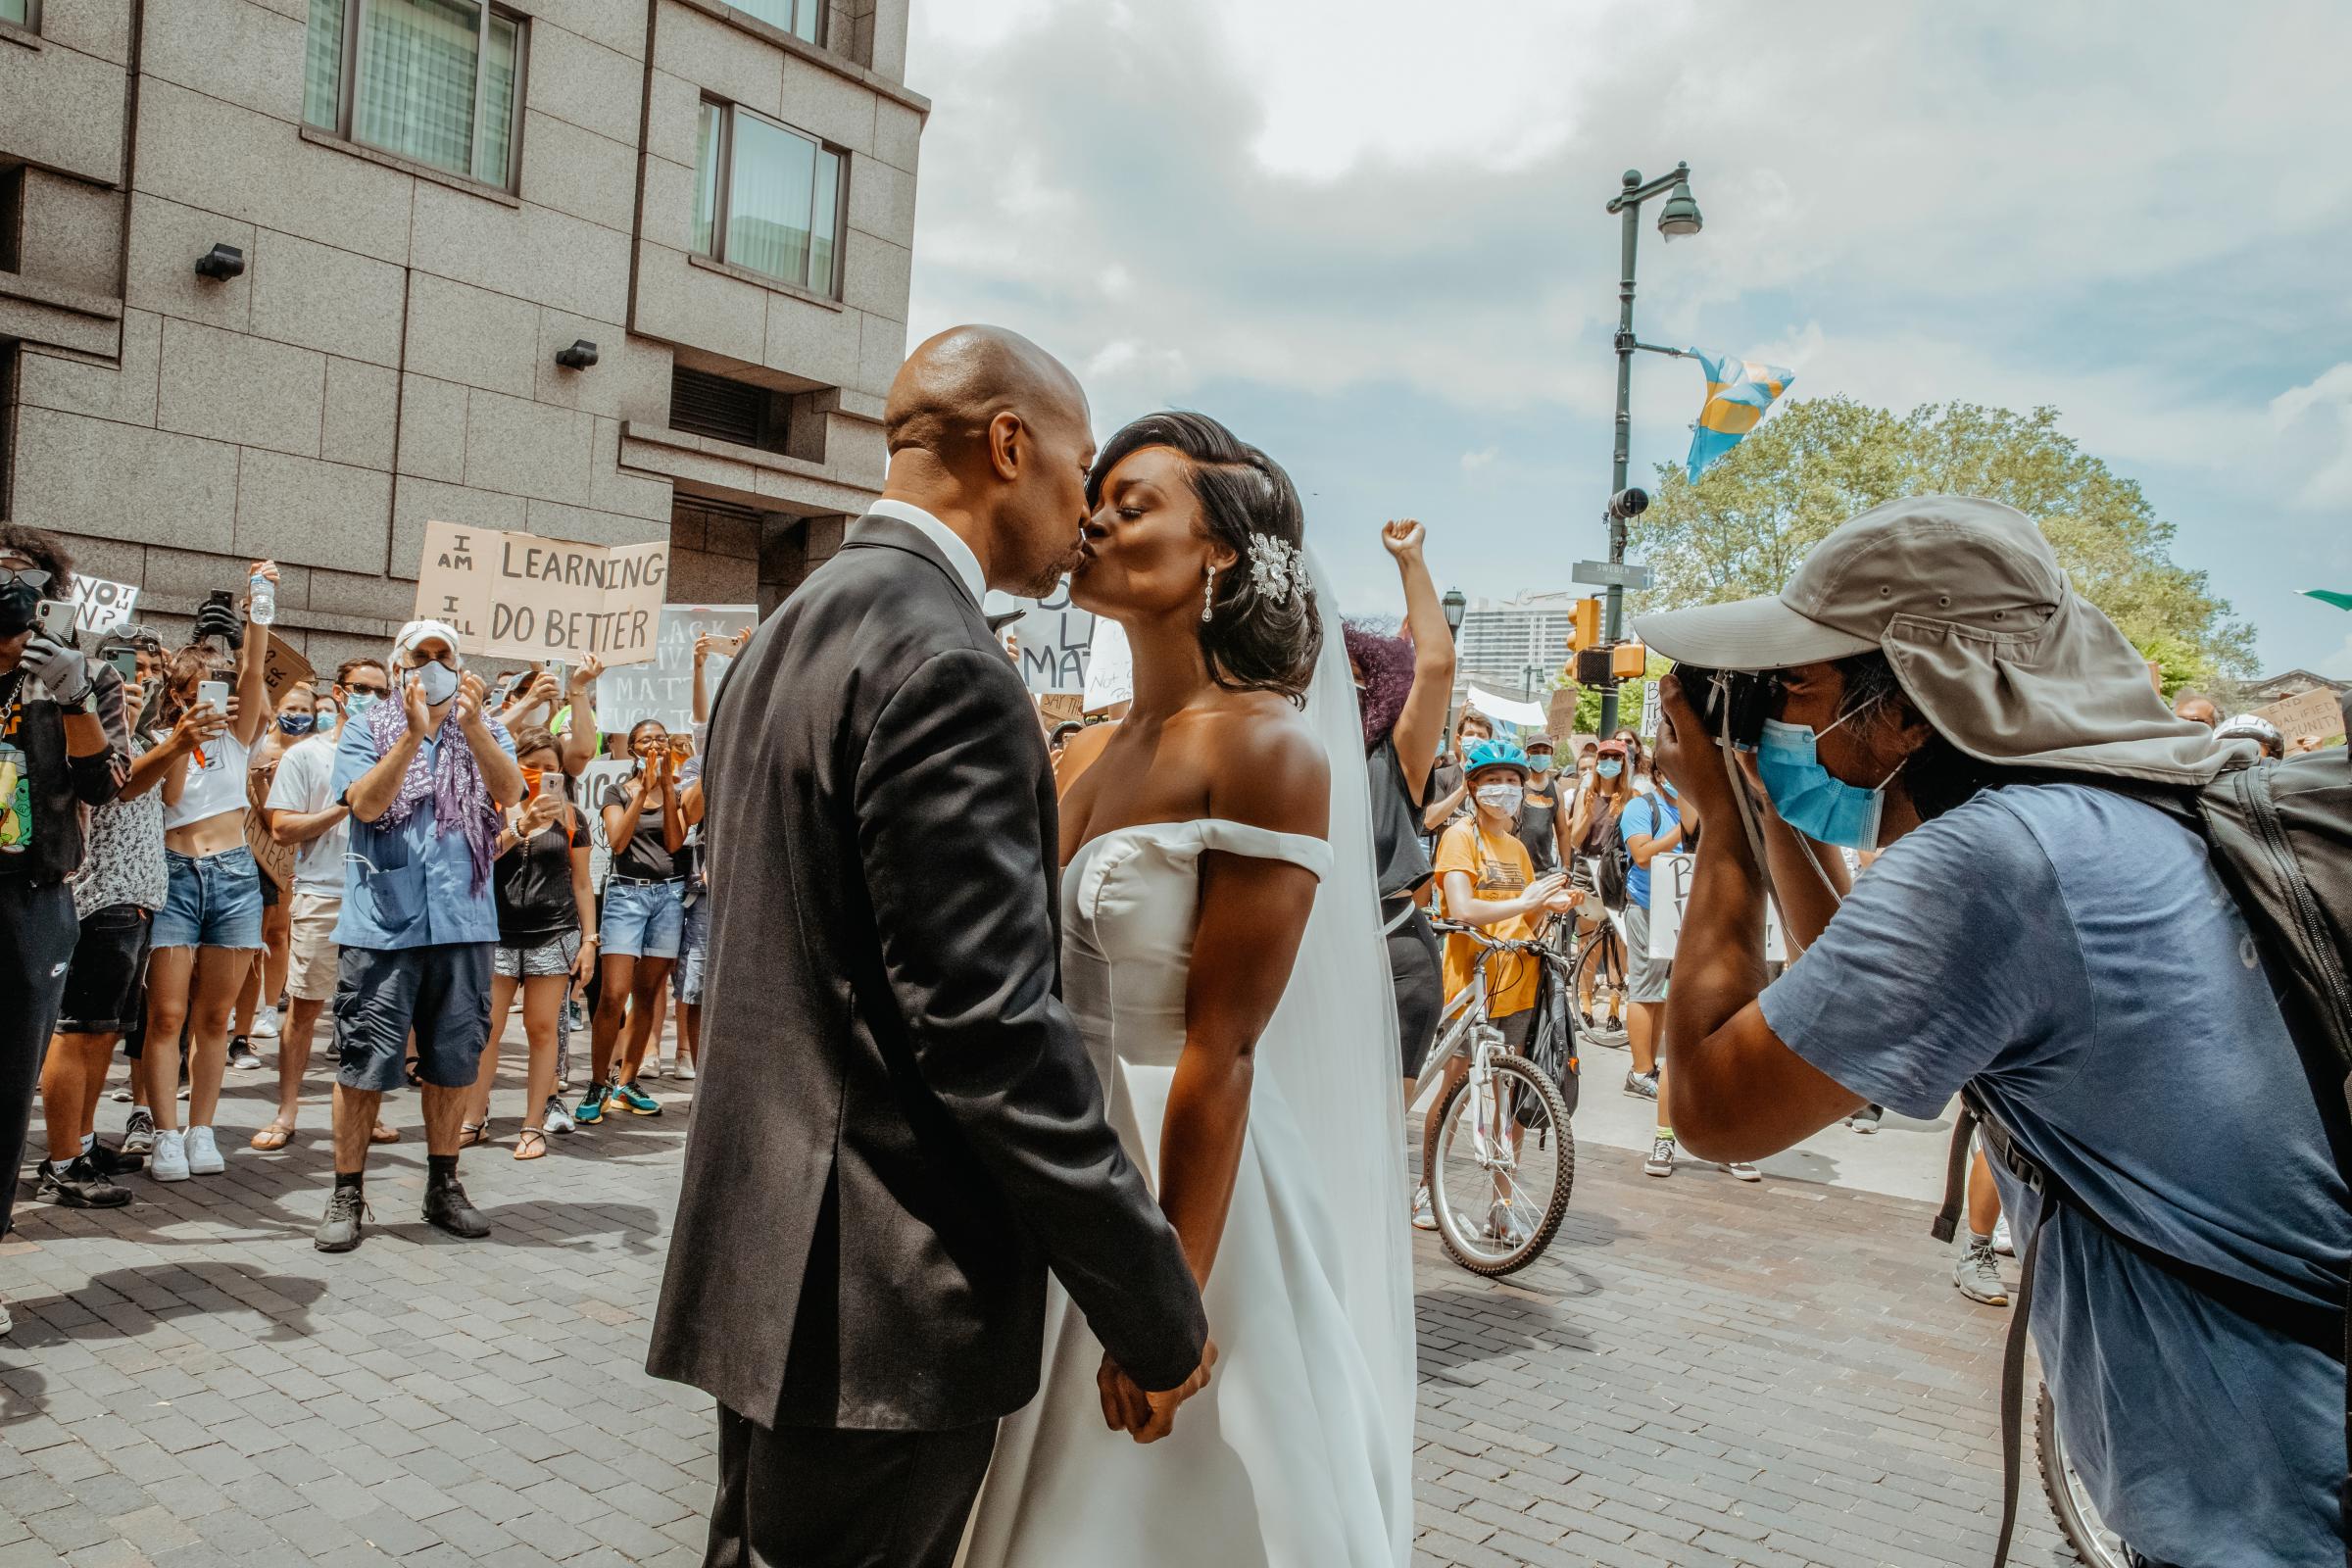 Dr. Kerry Anne Perkins and Michael Gordon join a Black Lives Matter protest taking place alongside their wedding ceremony at The Logan hotel in Philadelphia on June 6, 2020.